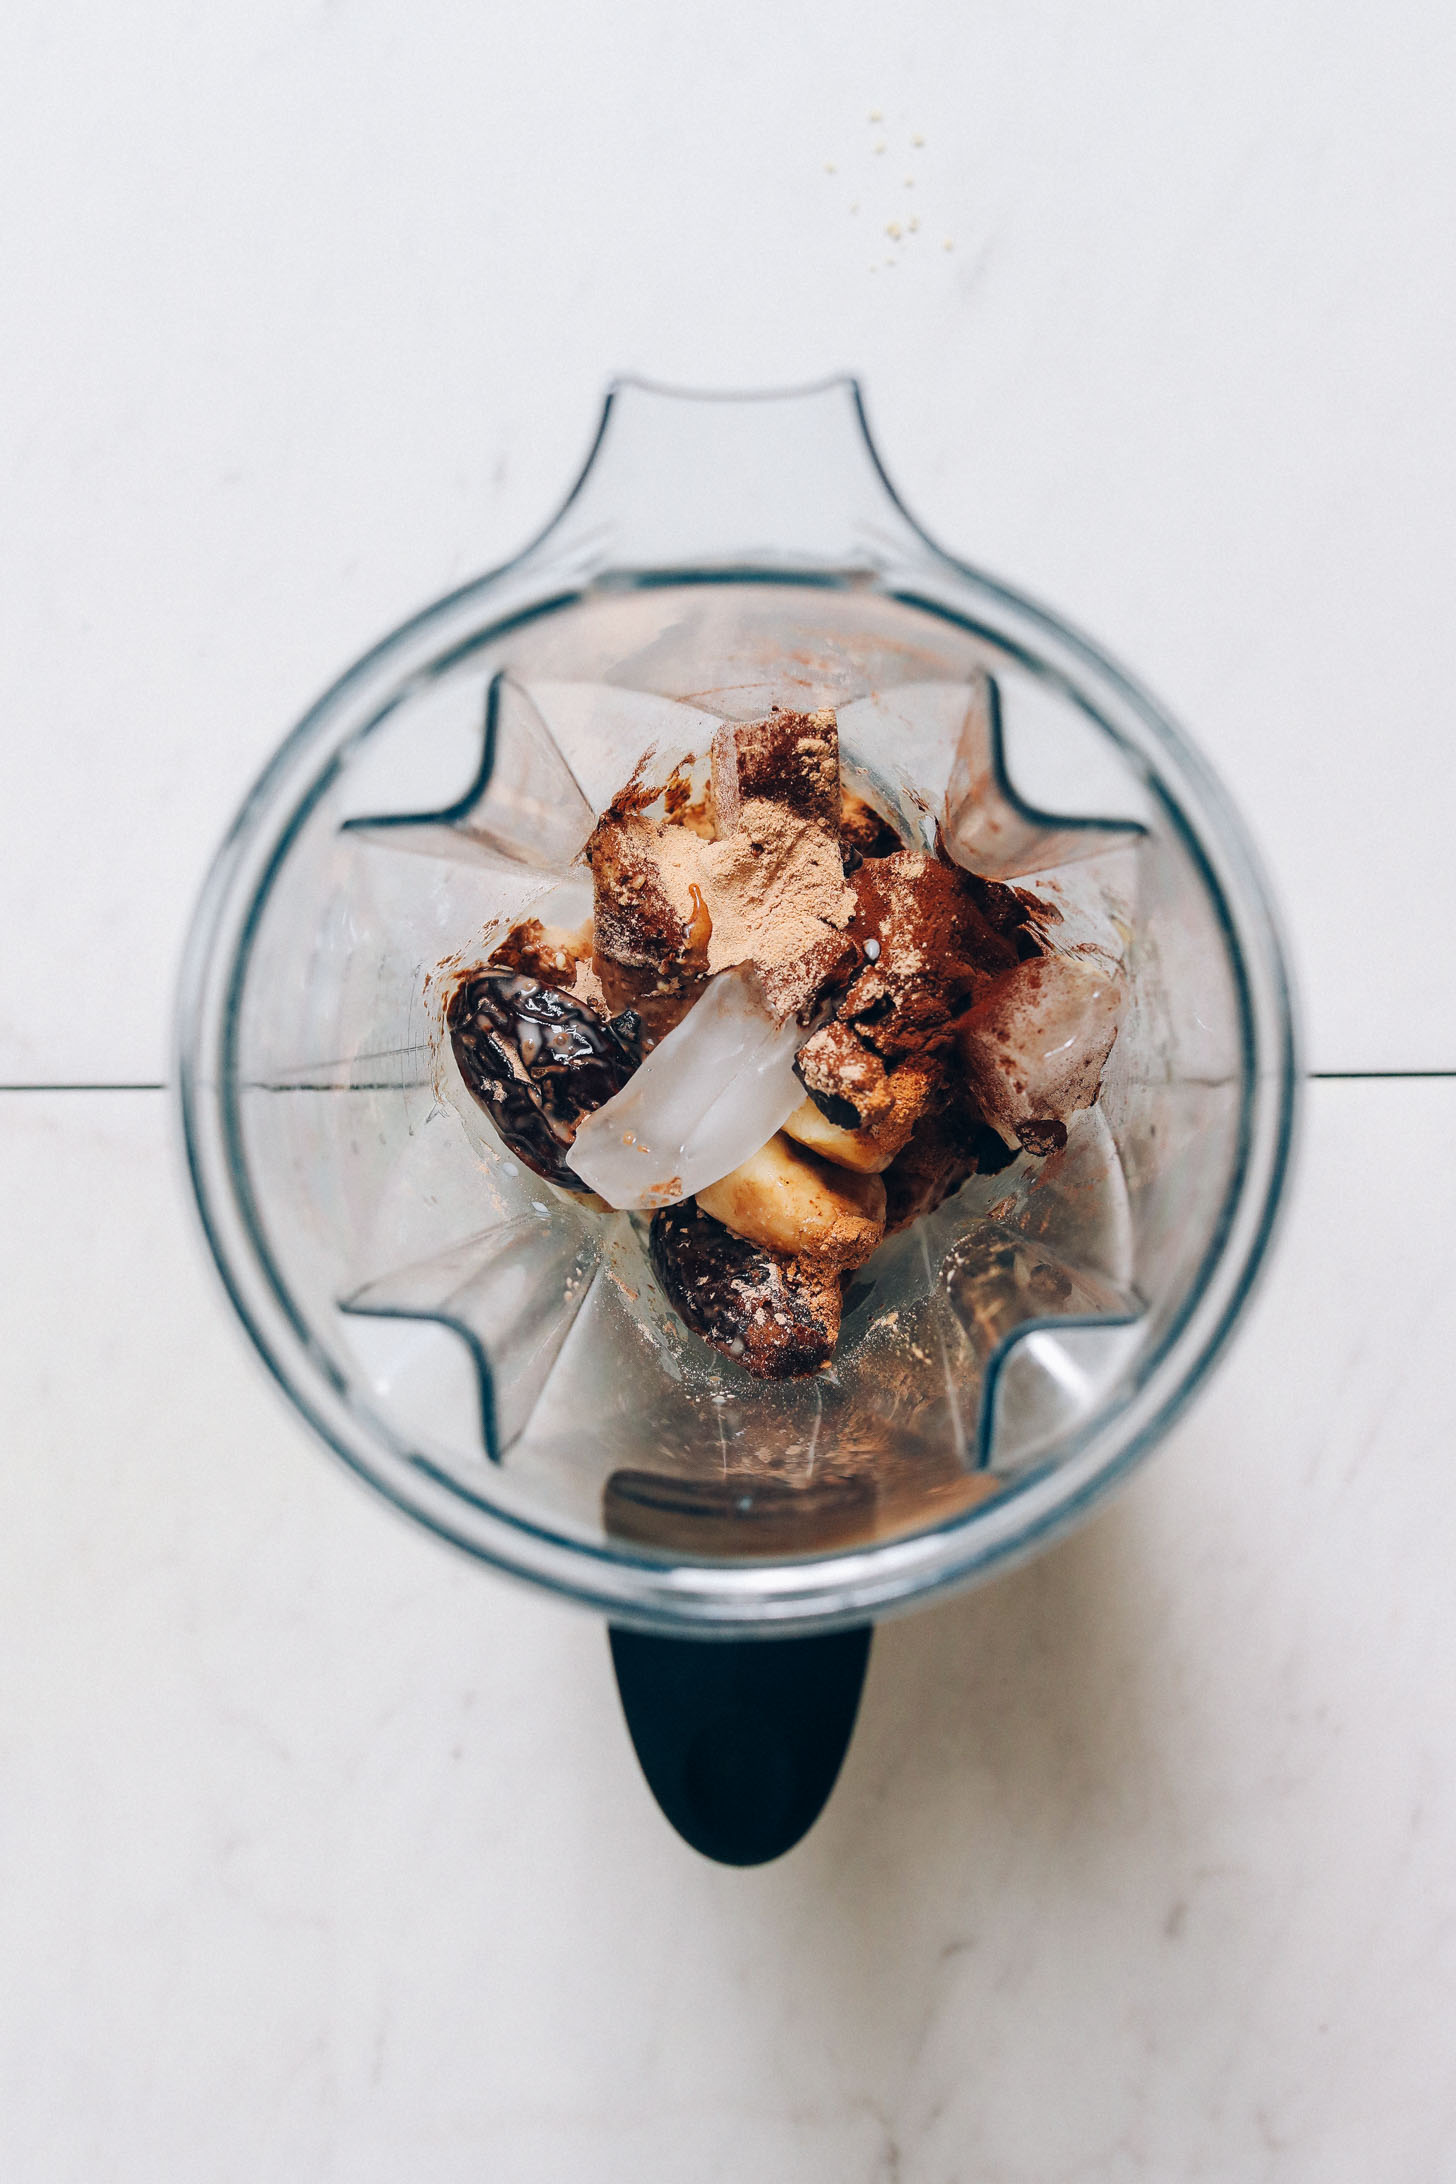 Blender with dates, banana, ice cubes, adaptogenic herbs, and cacao